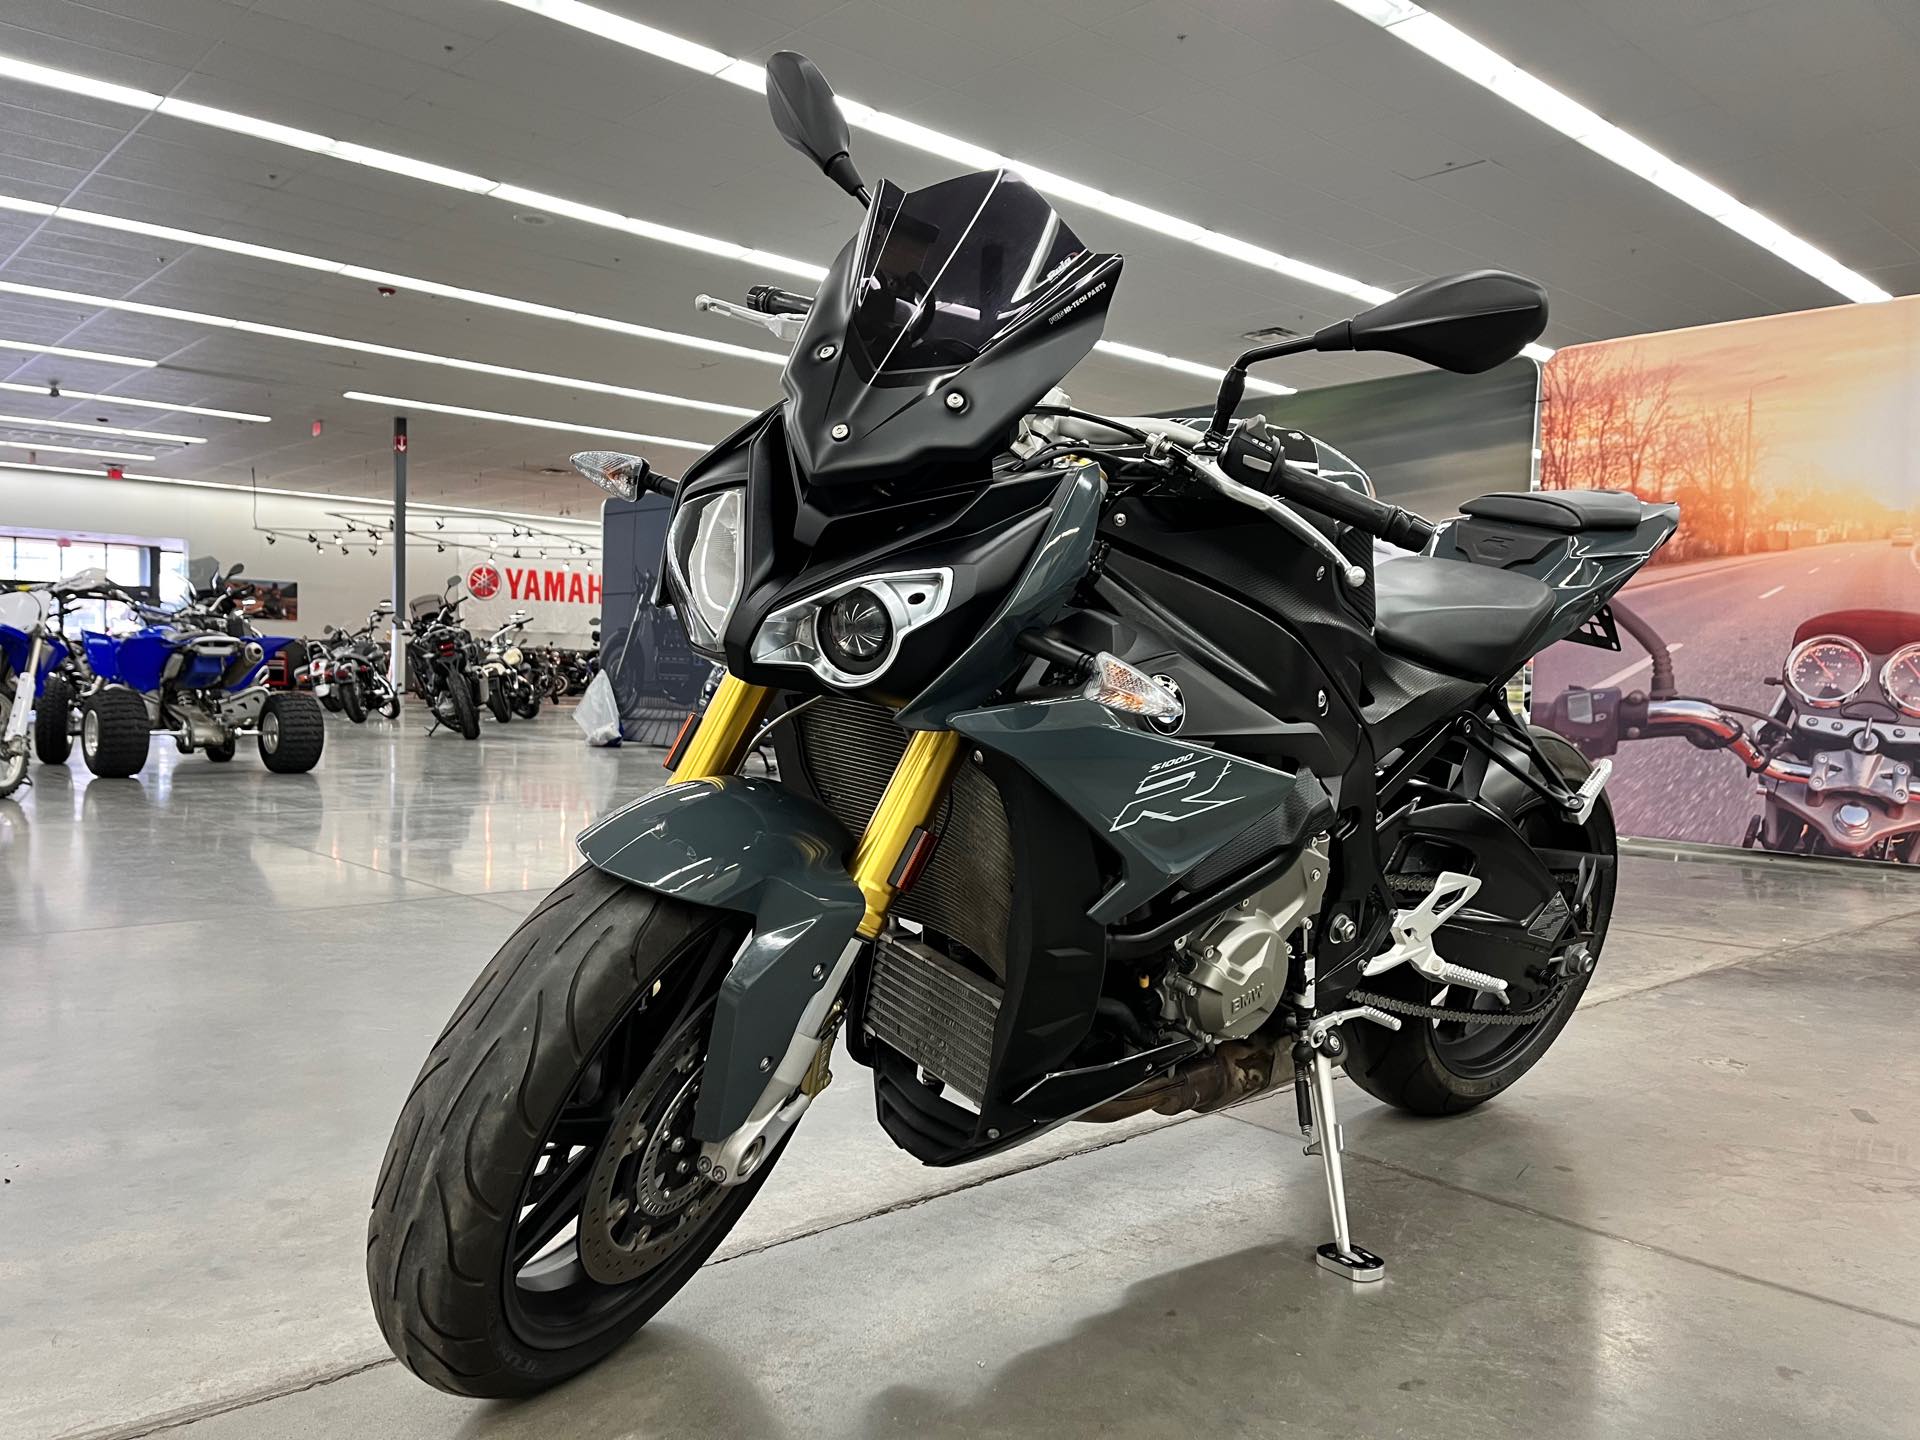 2017 BMW S 1000 R at Aces Motorcycles - Denver